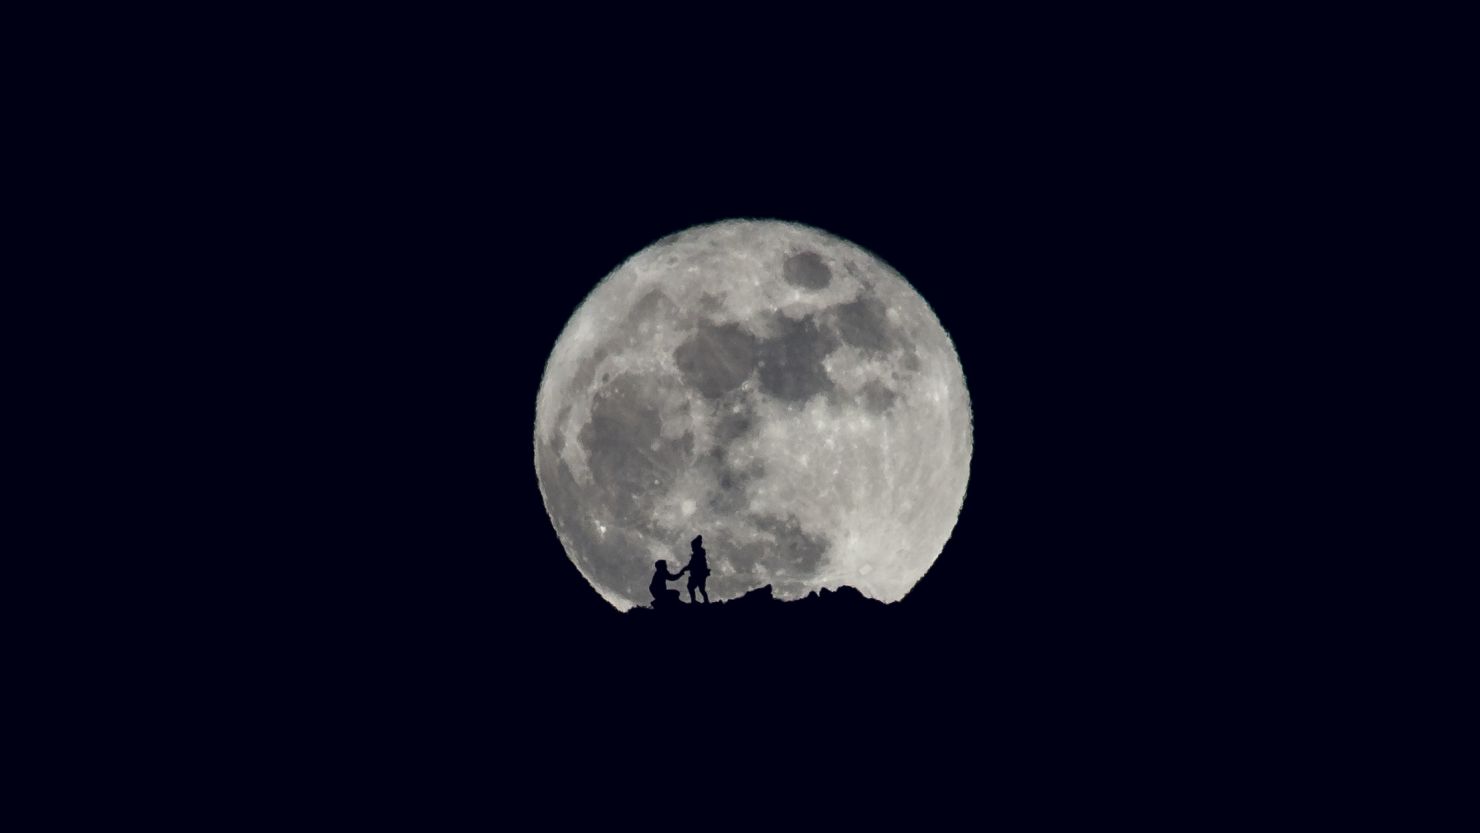 A full moon shines on Christmas in Ohrid, Macedonia. CNN iReporter Stojan Stojanovski photographed the silhouette of a marriage proposal in front of the moon on Friday.